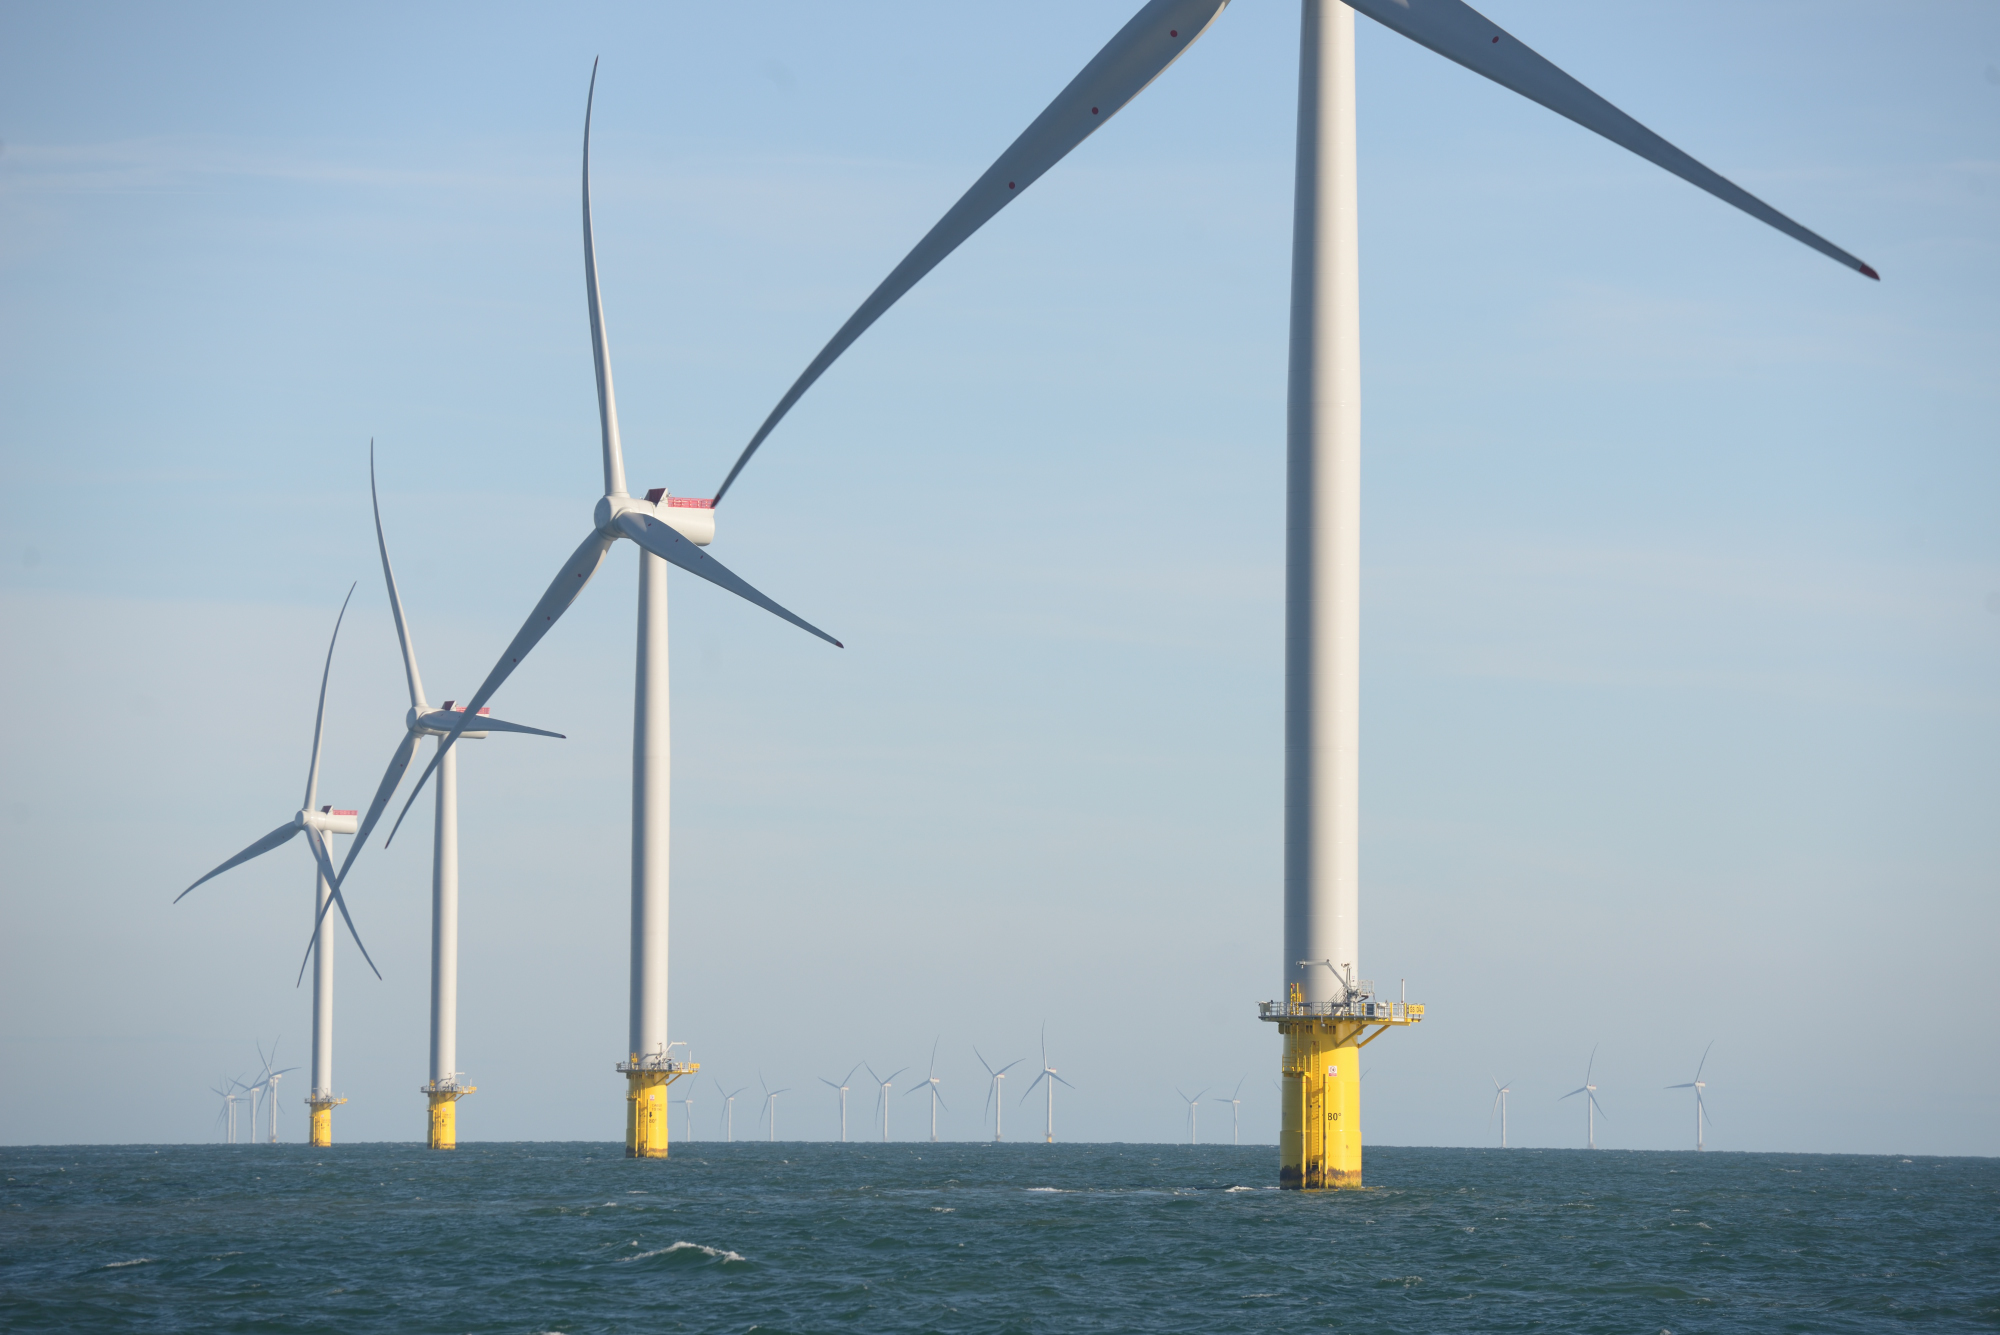 A photo of the Galloper offshore wind farm for illustration